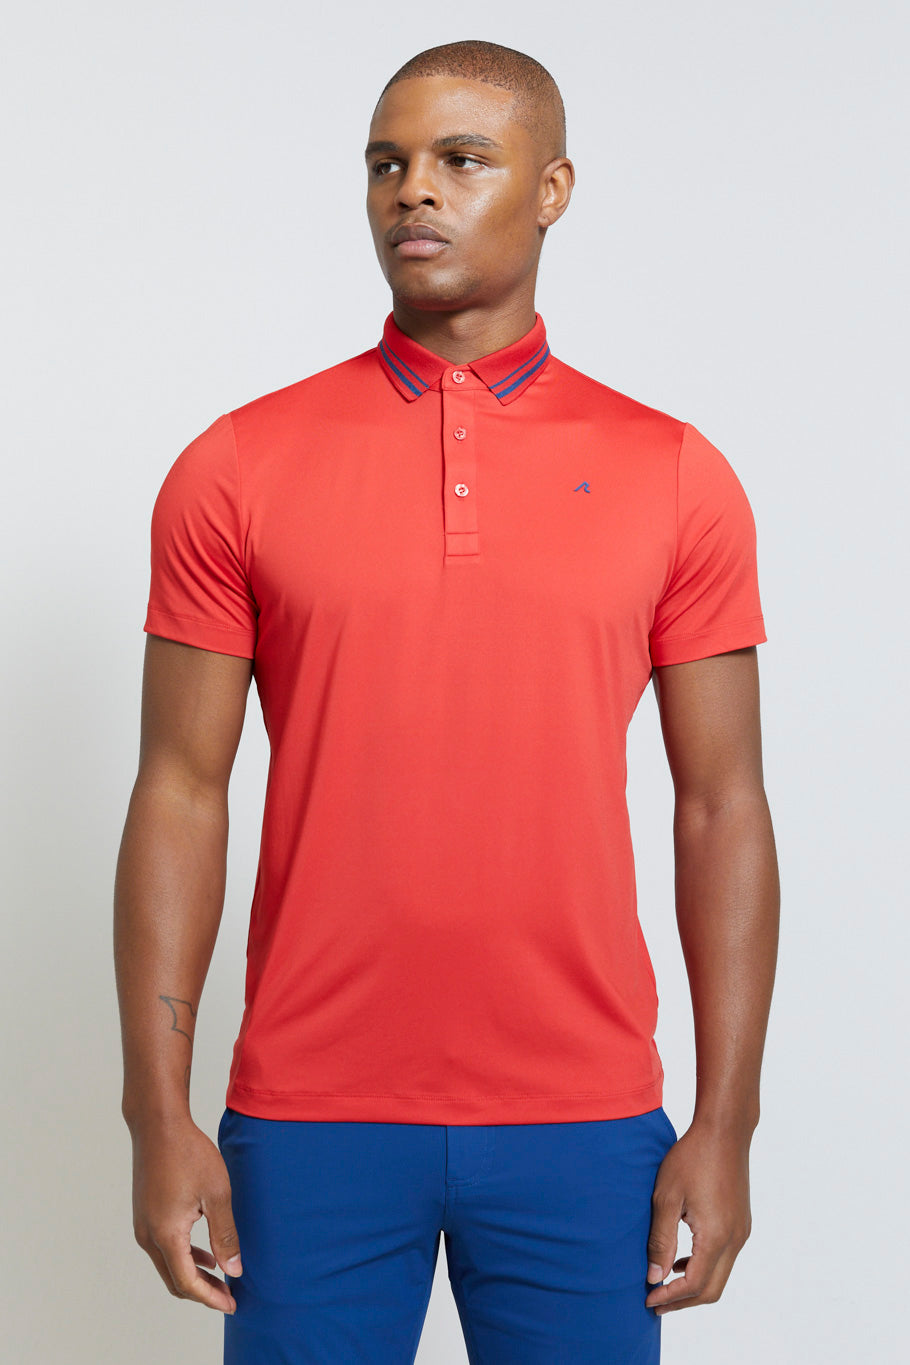 Image of the cadman polo in rio ss23